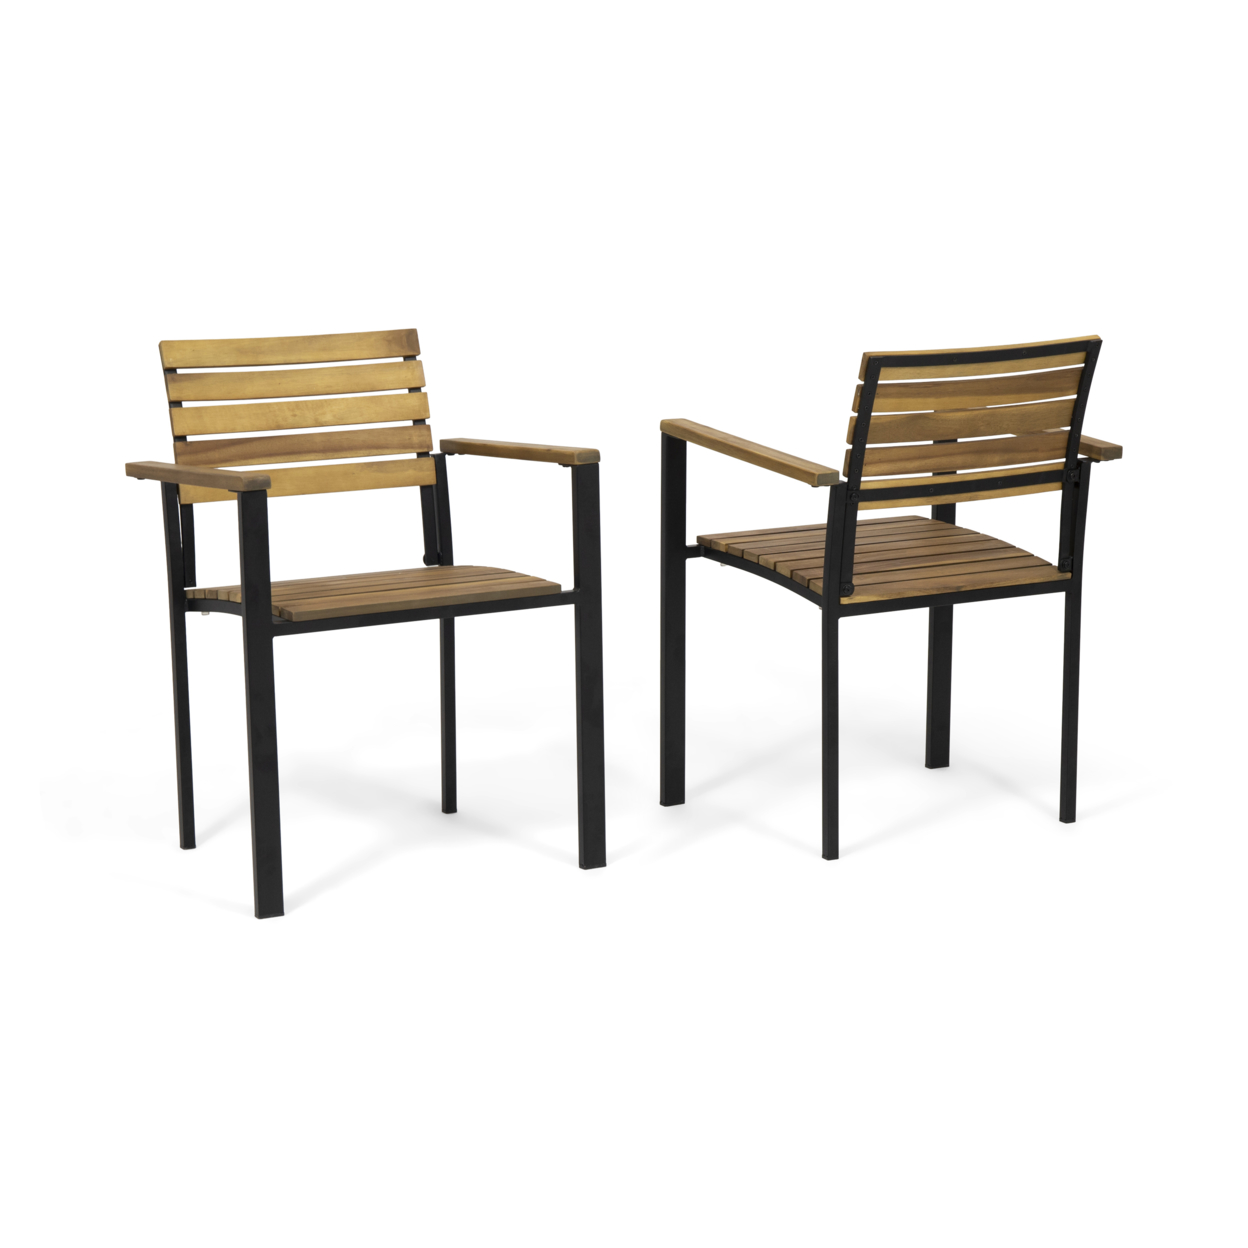 Alberta Outdoor Wood And Iron Dining Chairs (Set Of 2) - Teak Finish, Black